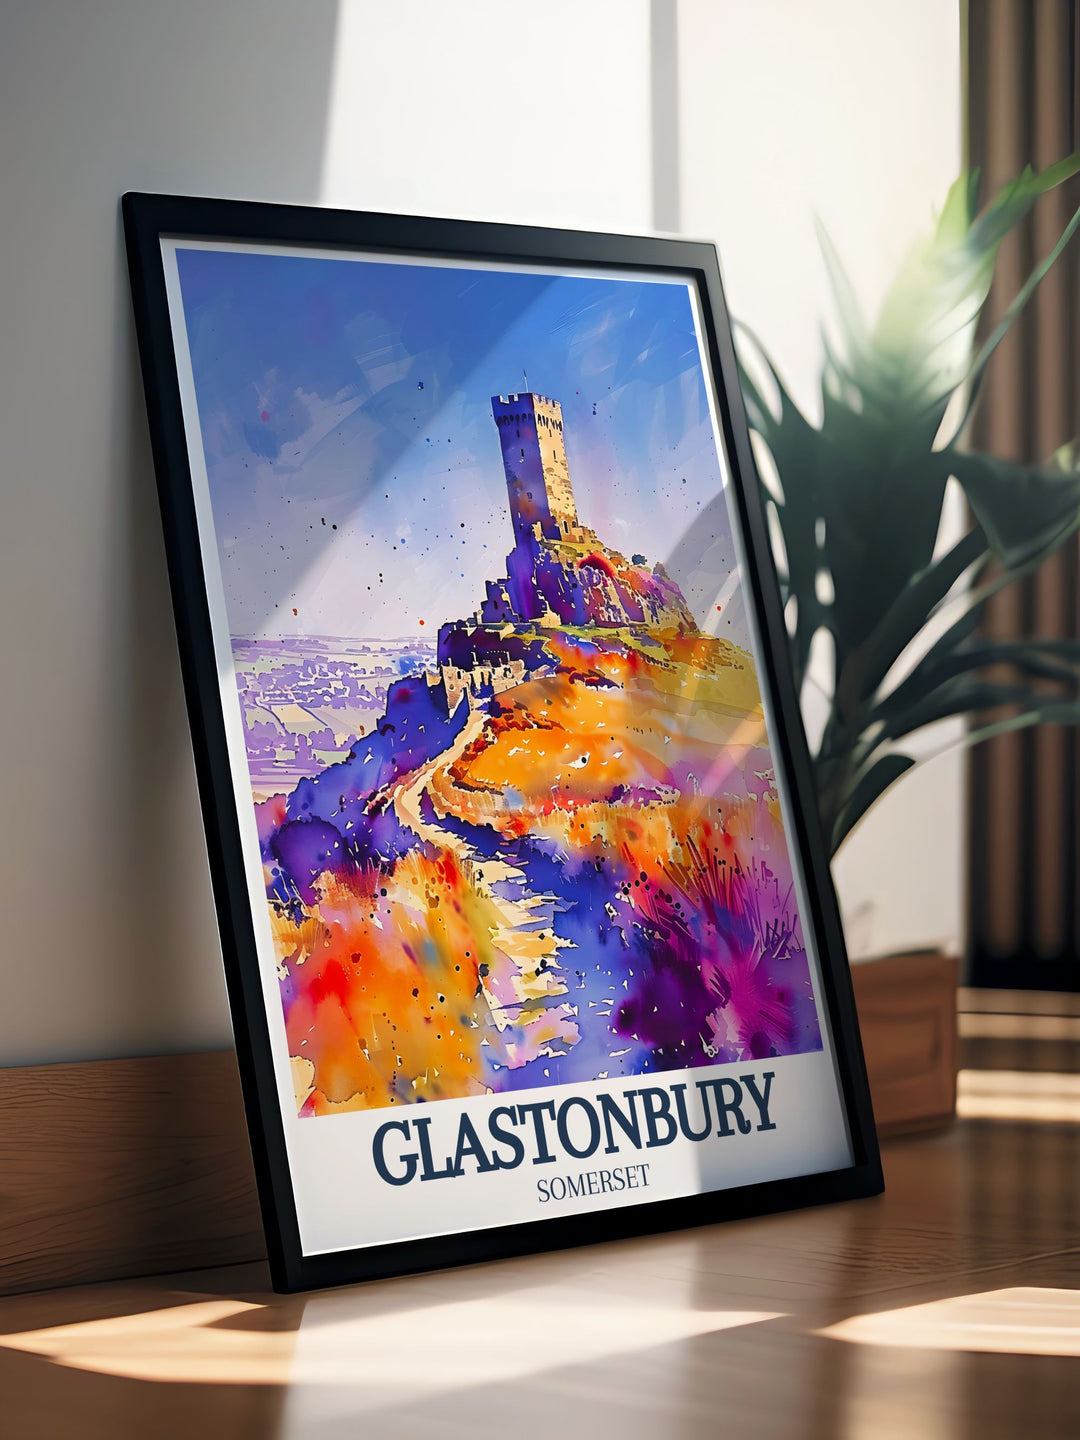 Elegant Glastonbury Tor art print highlighting the beauty of St. Michaels tower and Somerset levels an excellent choice for UK wall art and perfect for those seeking unique England travel gifts or captivating home decor pieces.